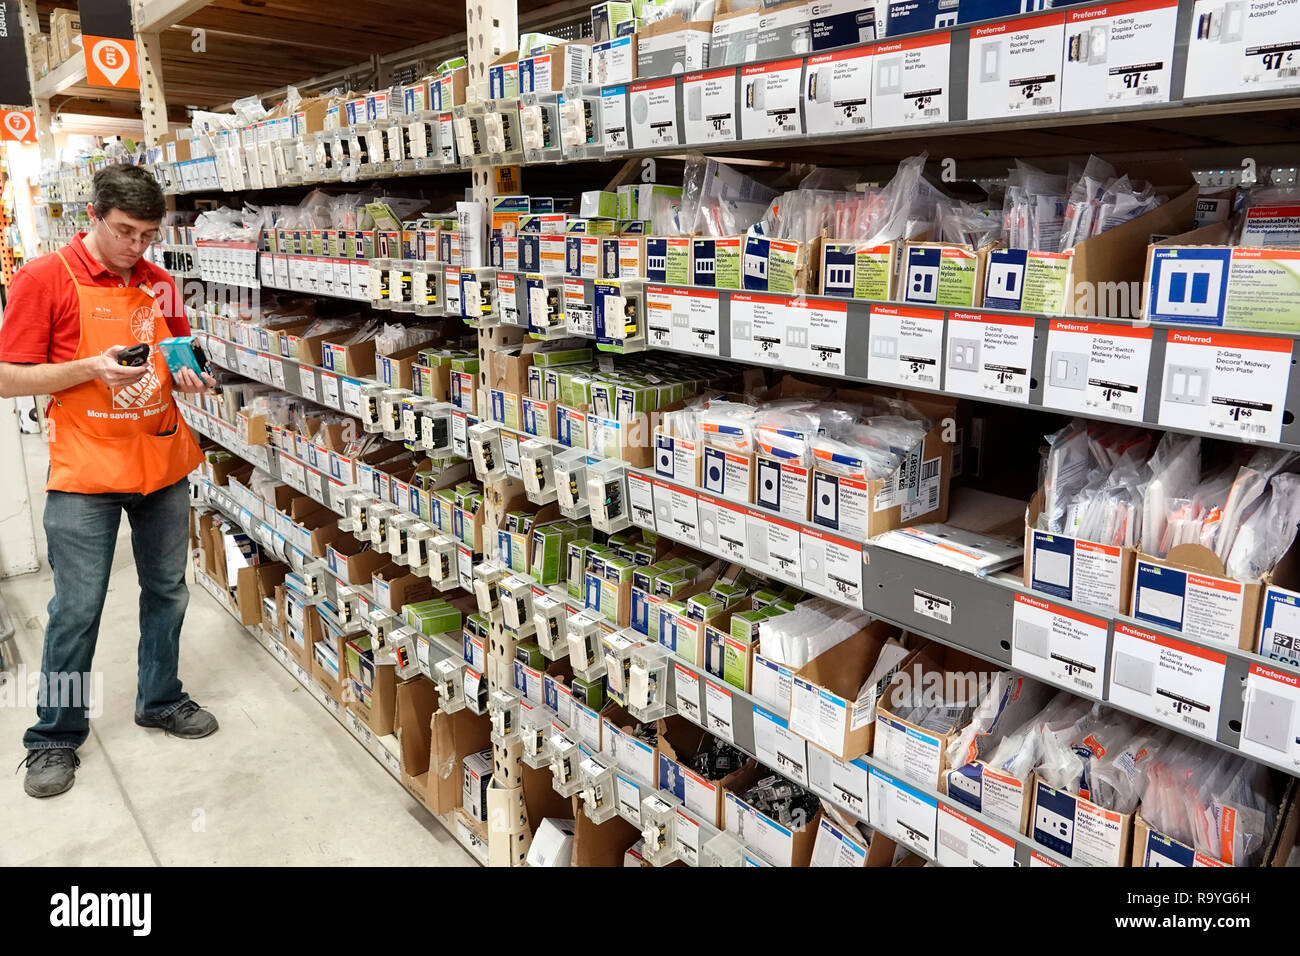 Inside View of a Home Depot Retail Store Editorial Stock Image